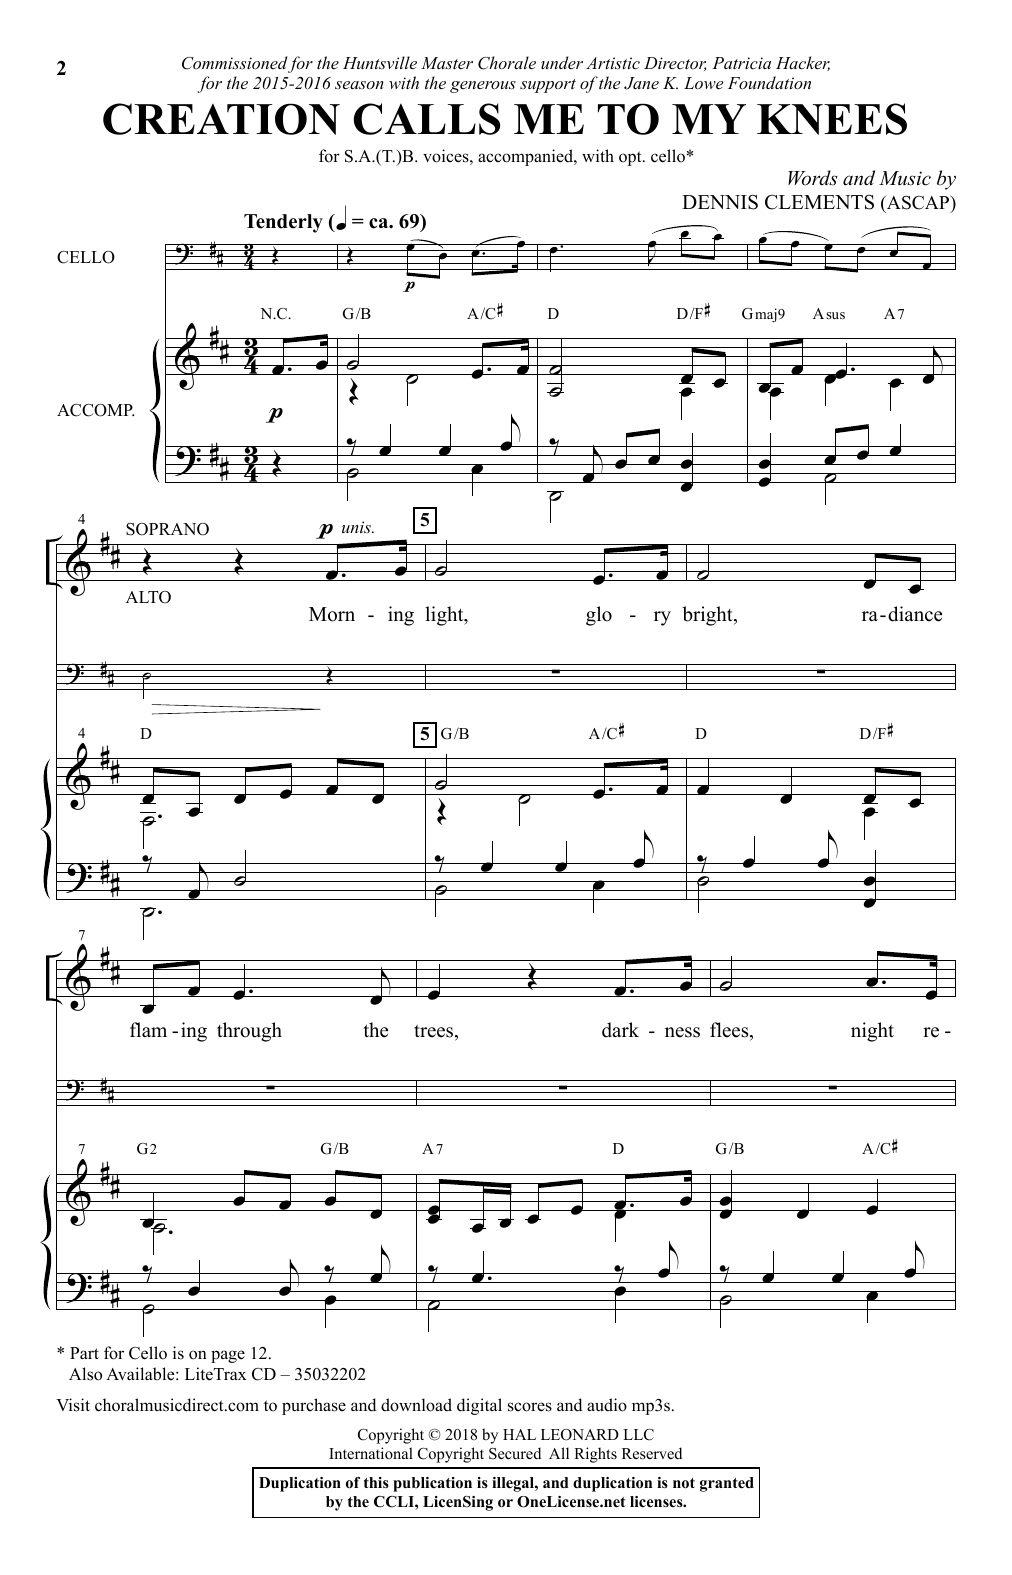 Creation Calls Me To My Knees sheet music